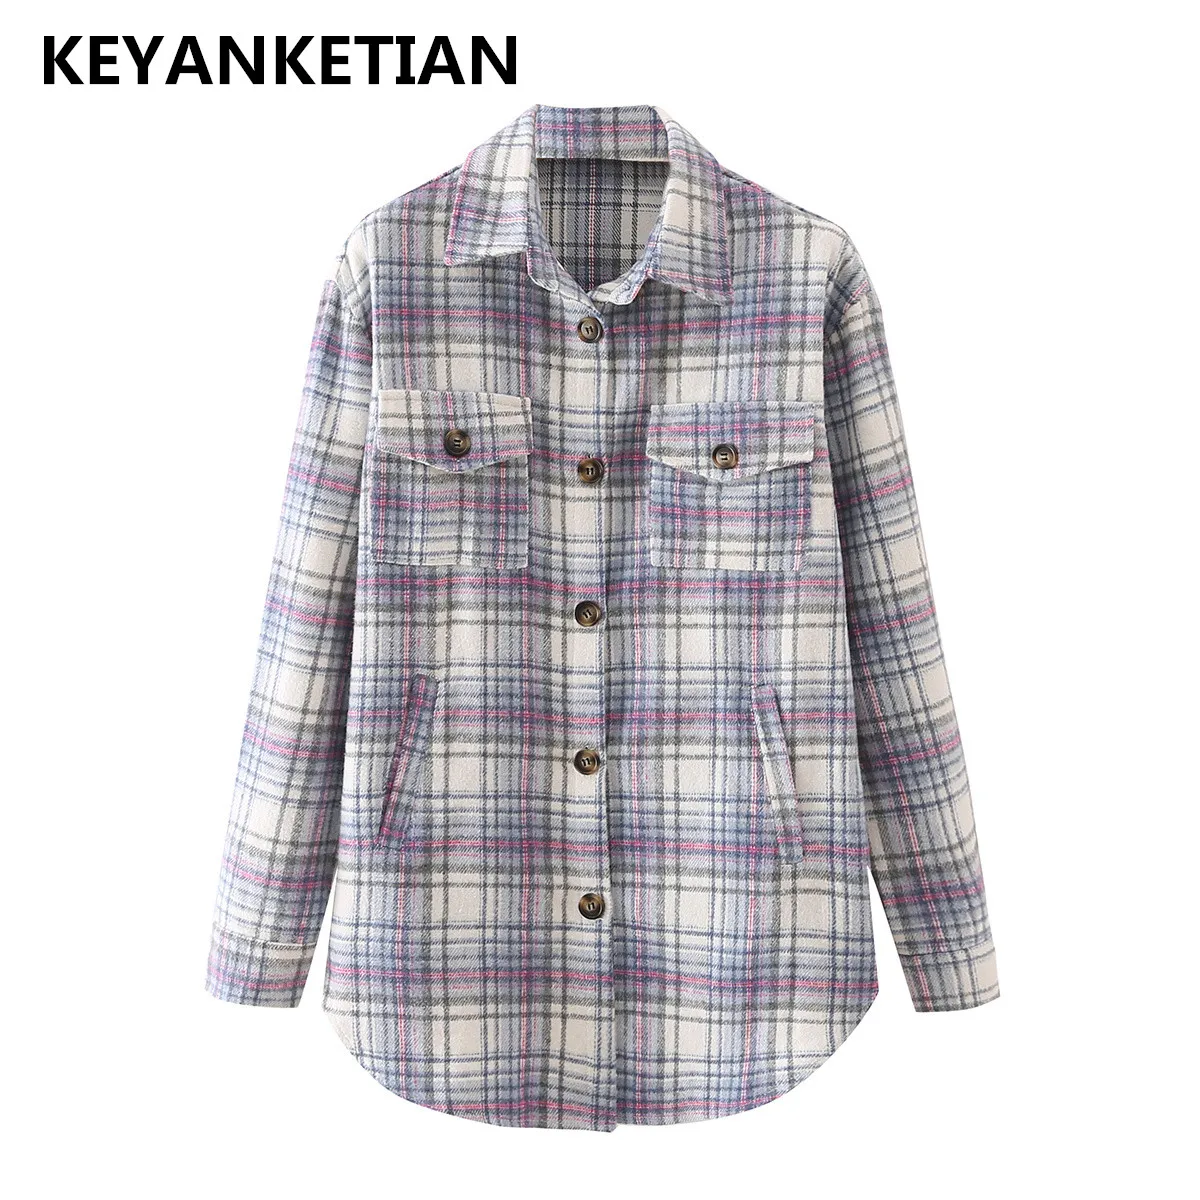 

KEYANKETIAN women's colorblock plaid woolen shirt autumn and winter British style loose pockets lapel buttoned casual jacket top